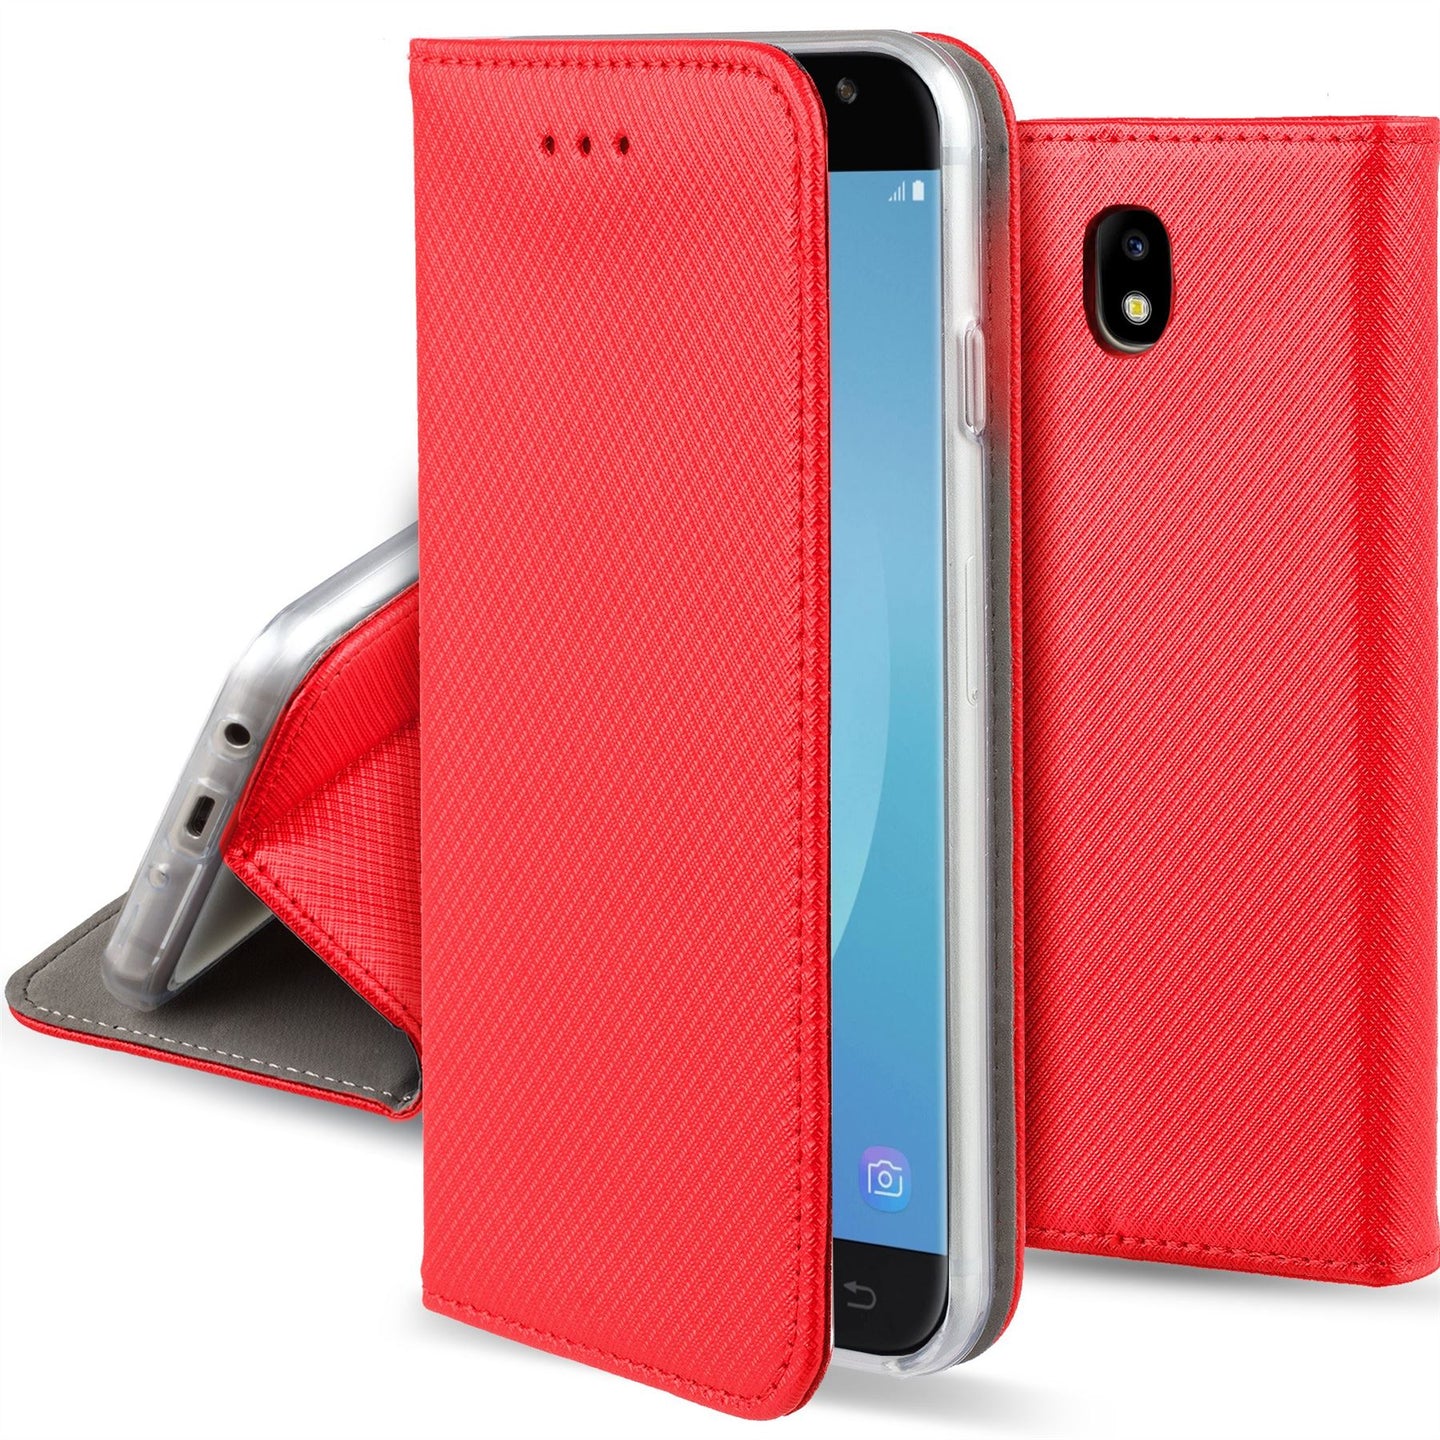 Moozy Case Flip Cover for Samsung J5 2017, Red - Smart Magnetic Flip Case with Card Holder and Stand